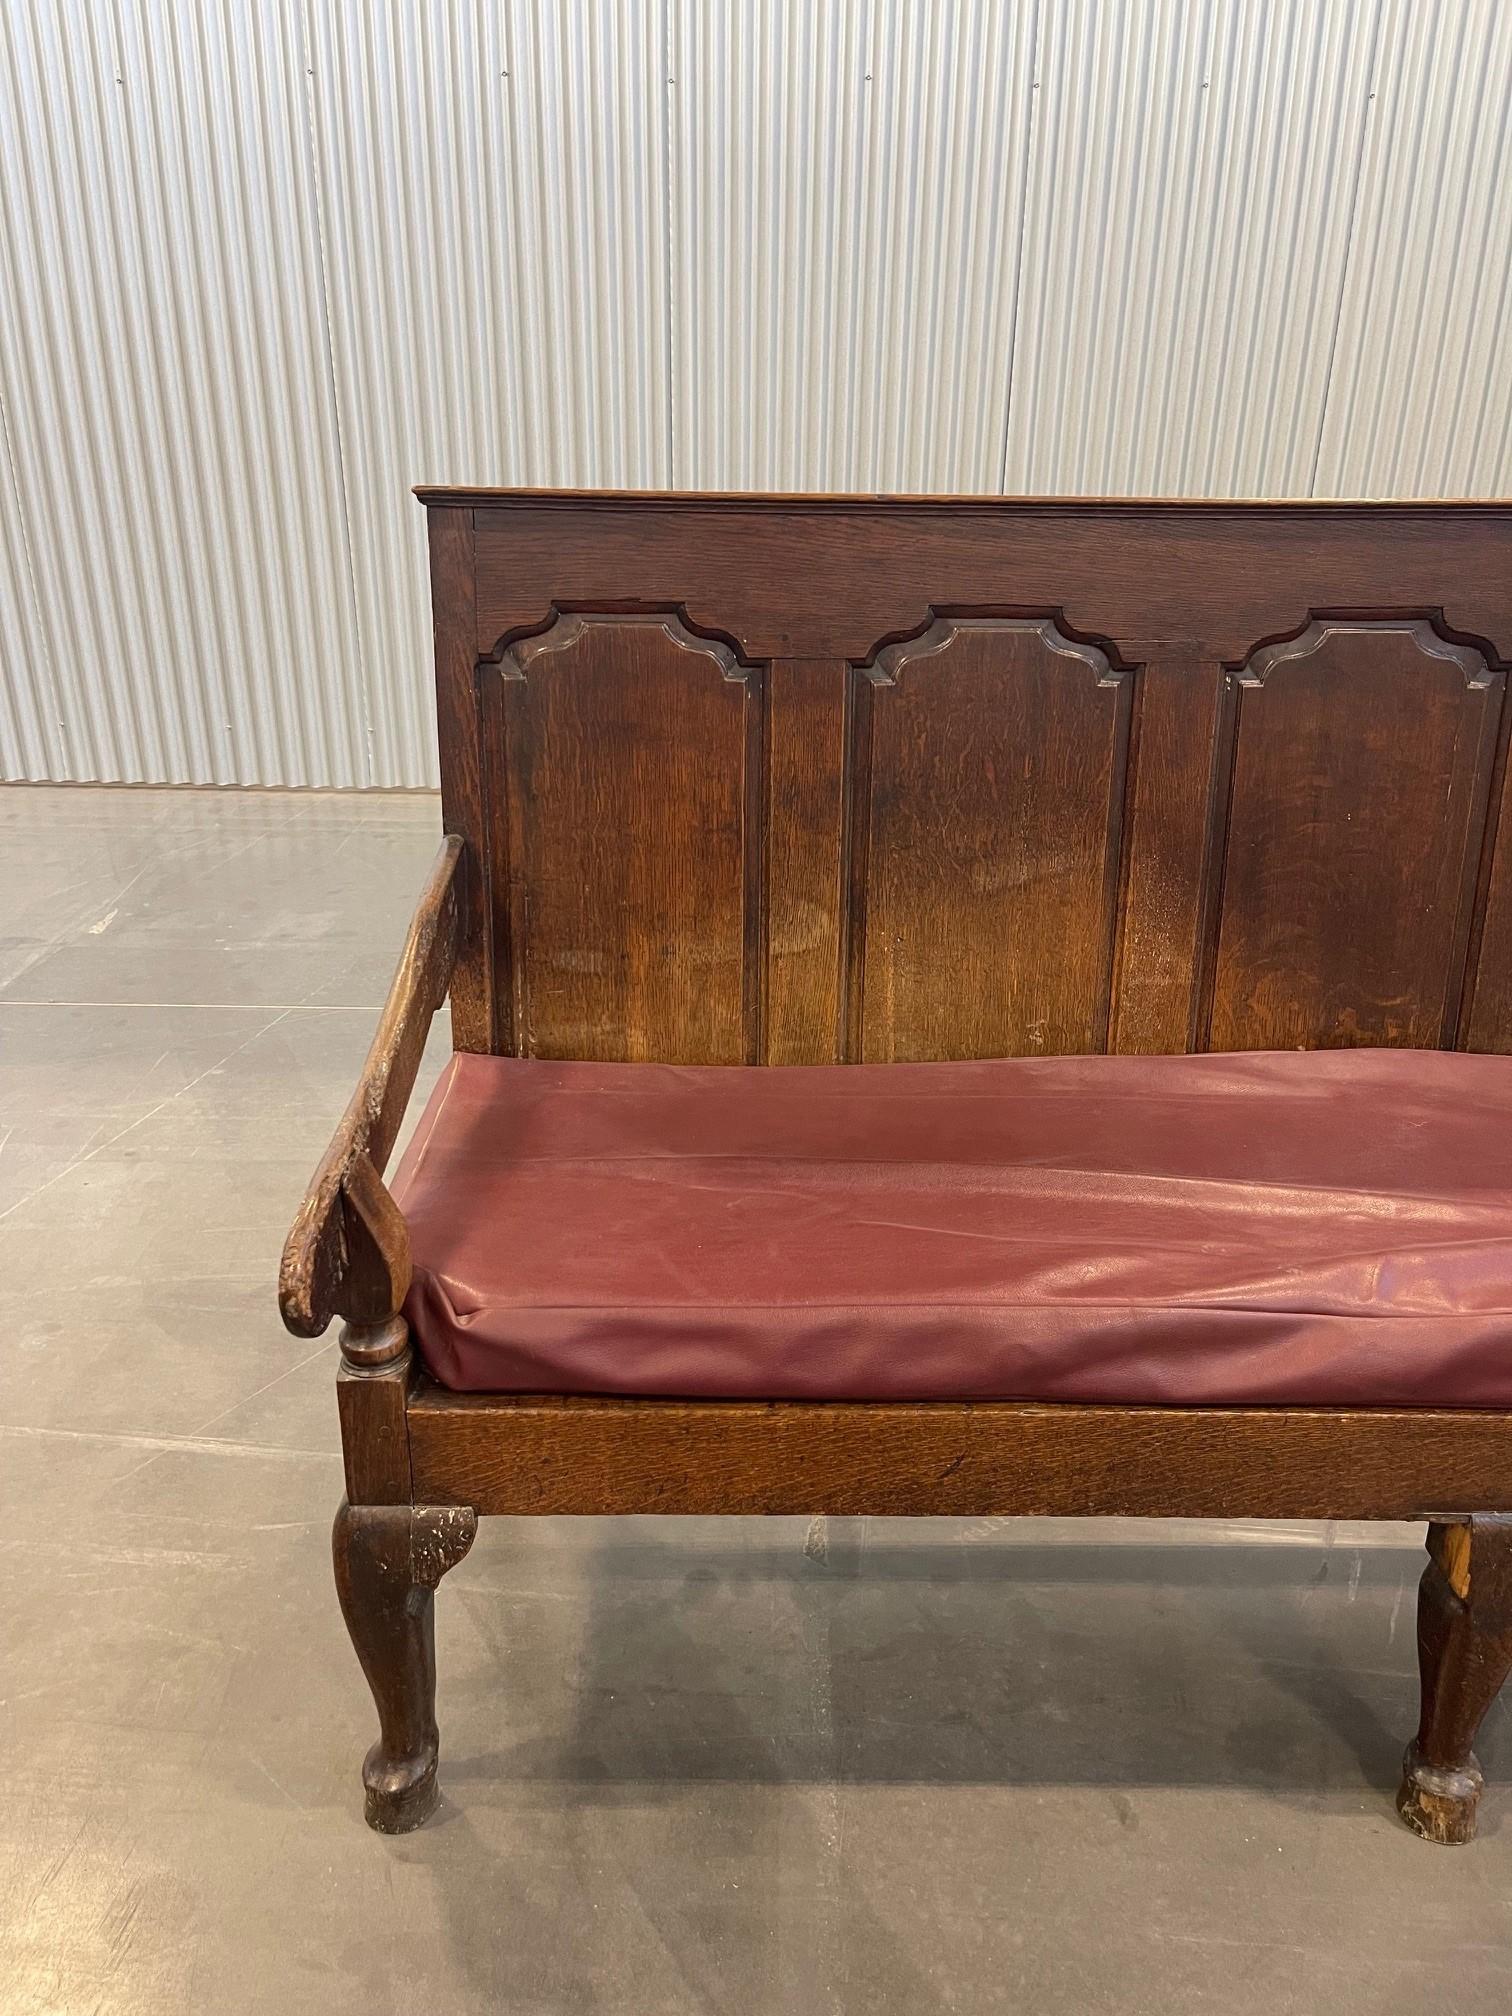 A George III (1790) Lancastrian oak panel back settle, raised on cabriole legs. 
Wonderful settle from the Stone House needs a little TLC, but otherwise a generally solid piece of furniture. The left arm connection between upright and arm is a